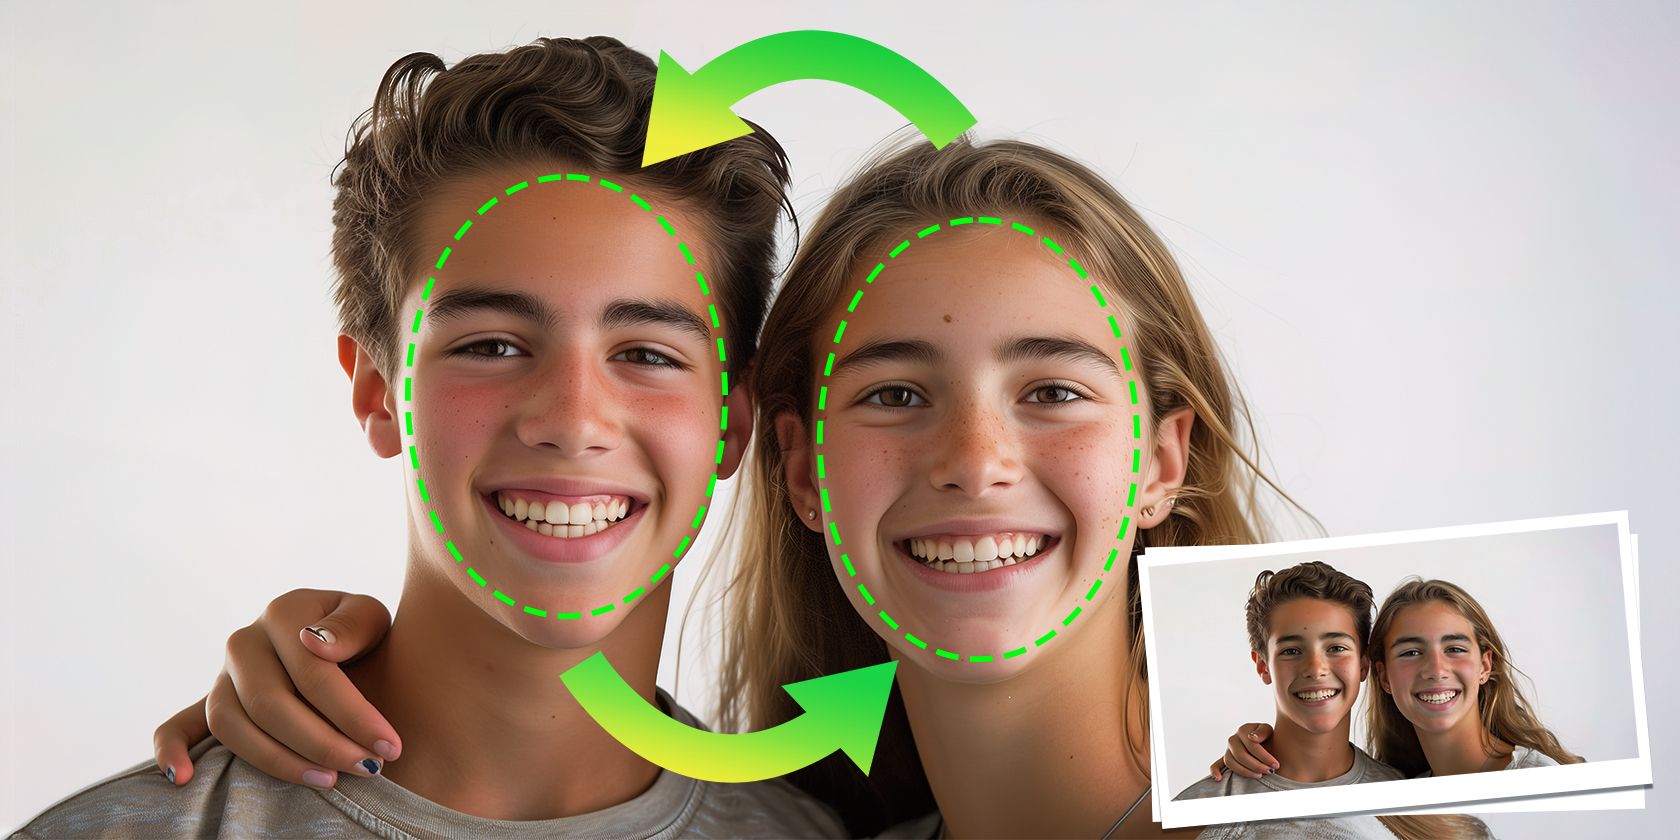 A teenage boy and girl smiling with faces close together, highlighted by dashed lines and a circular arrow, suggesting face swap editing